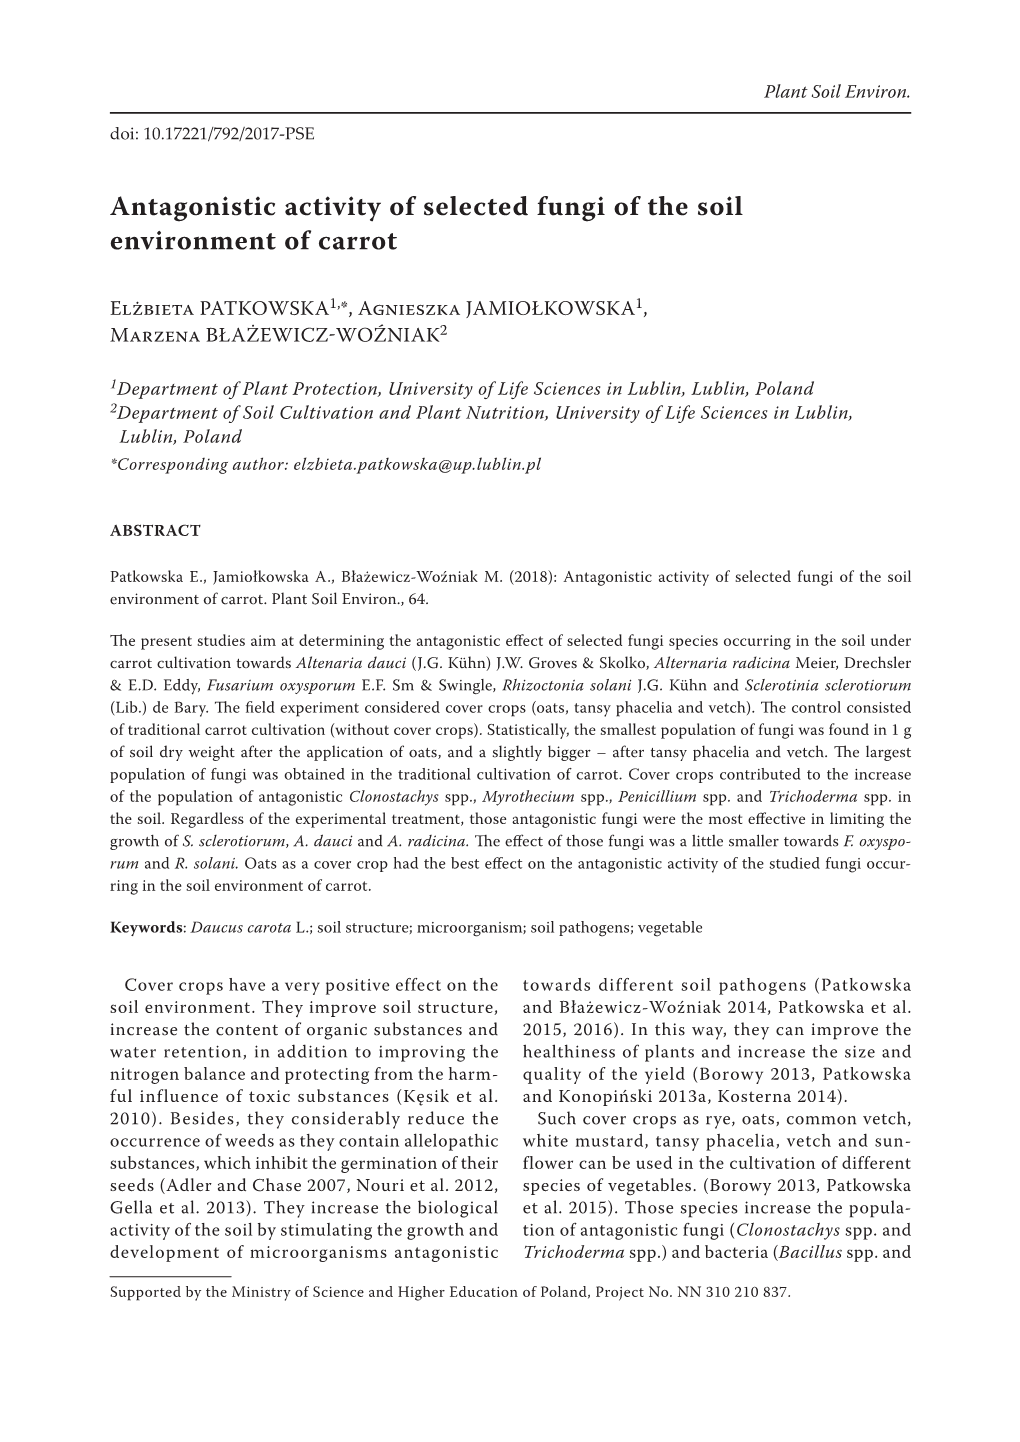 Antagonistic Activity of Selected Fungi of the Soil Environment of Carrot